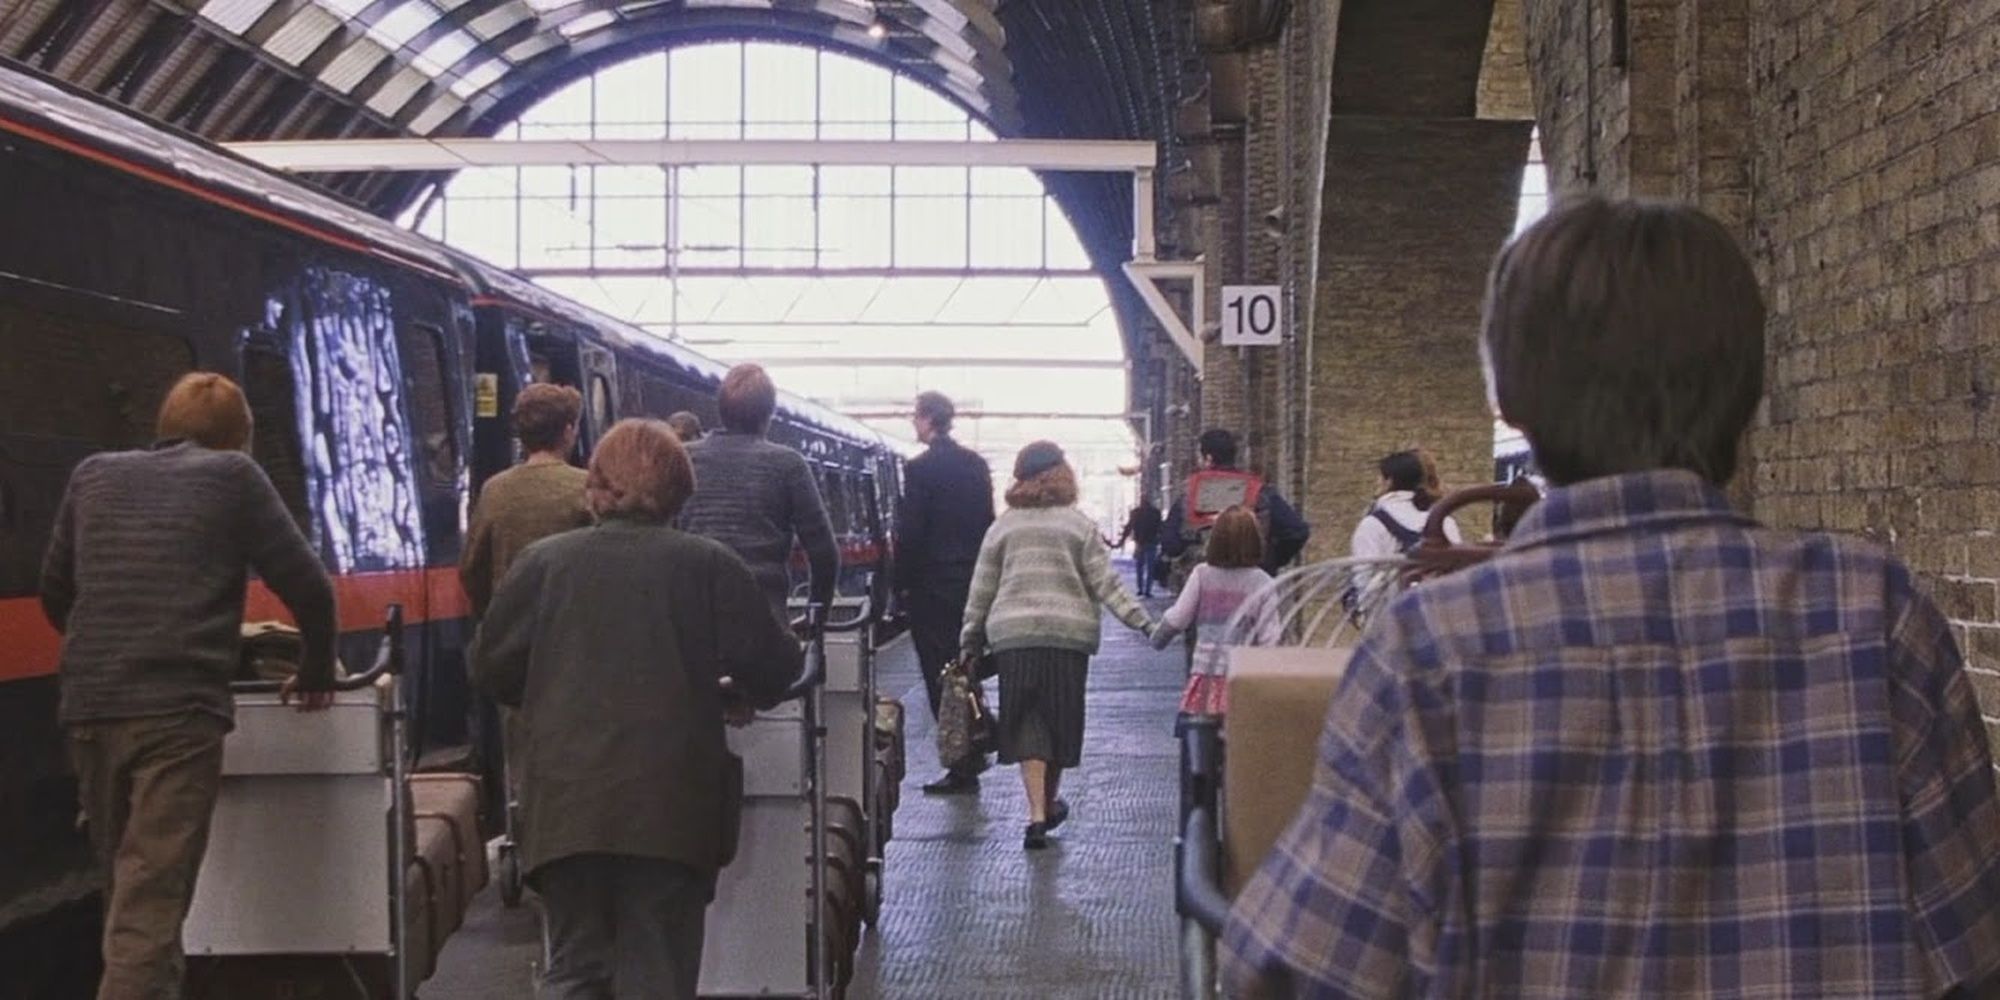 Harry Potter meets Welseys for the first time in Harry Potter and the Sorcerer's Stone on Platform 9 3/4